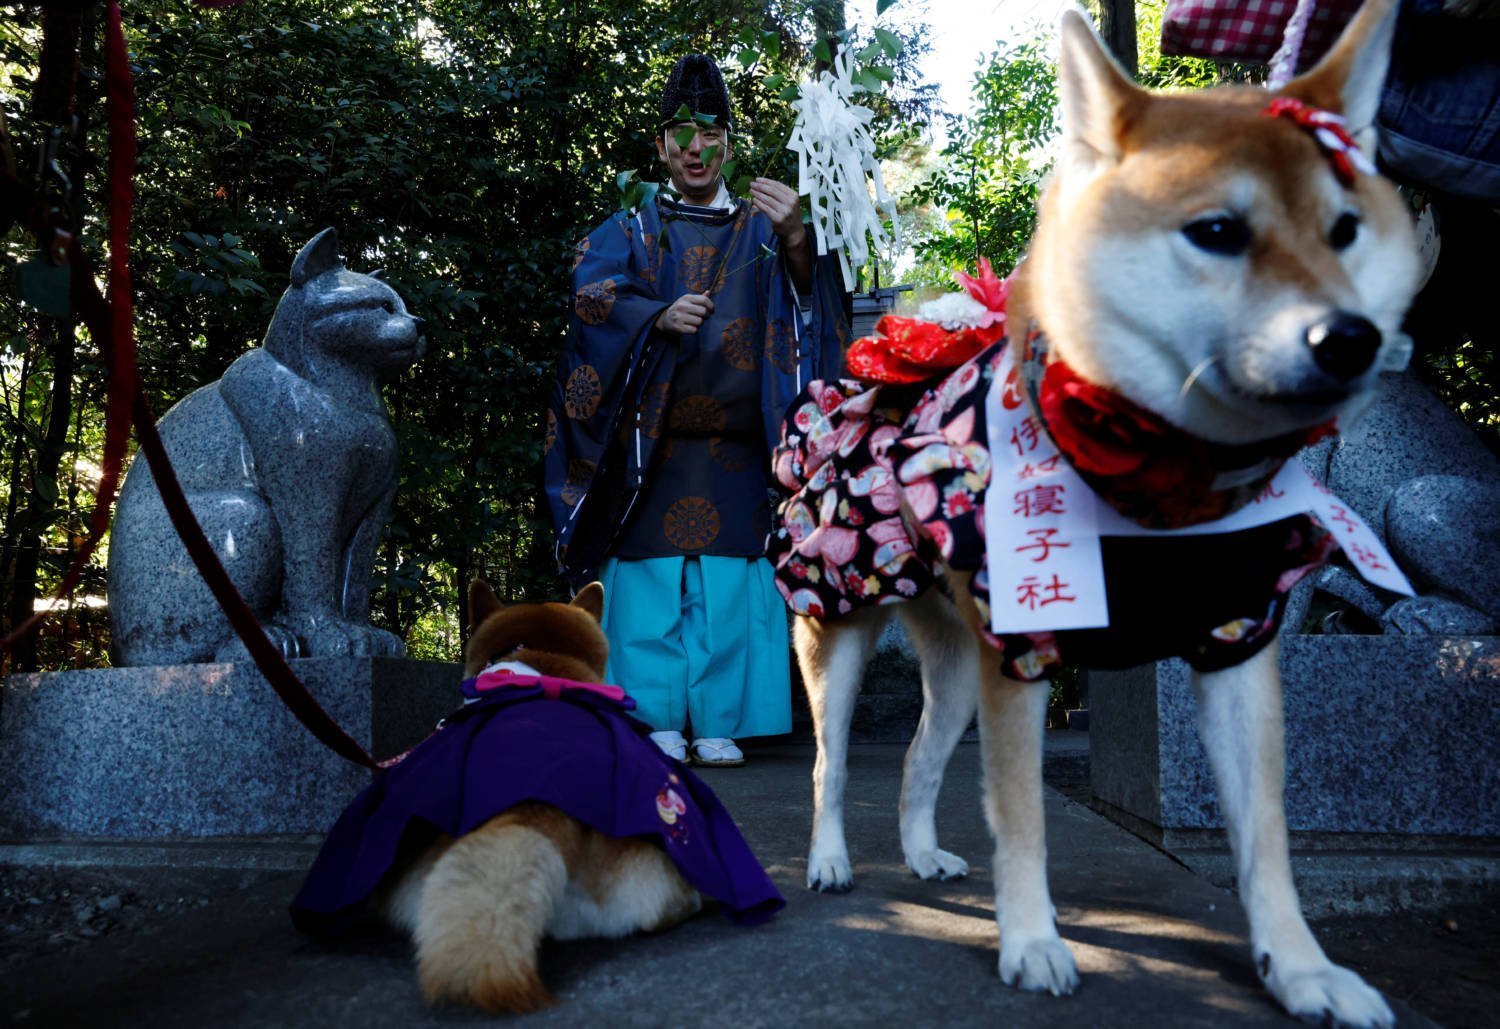 Pet Dogs Attend A Shichi Go San Blessing In Zama